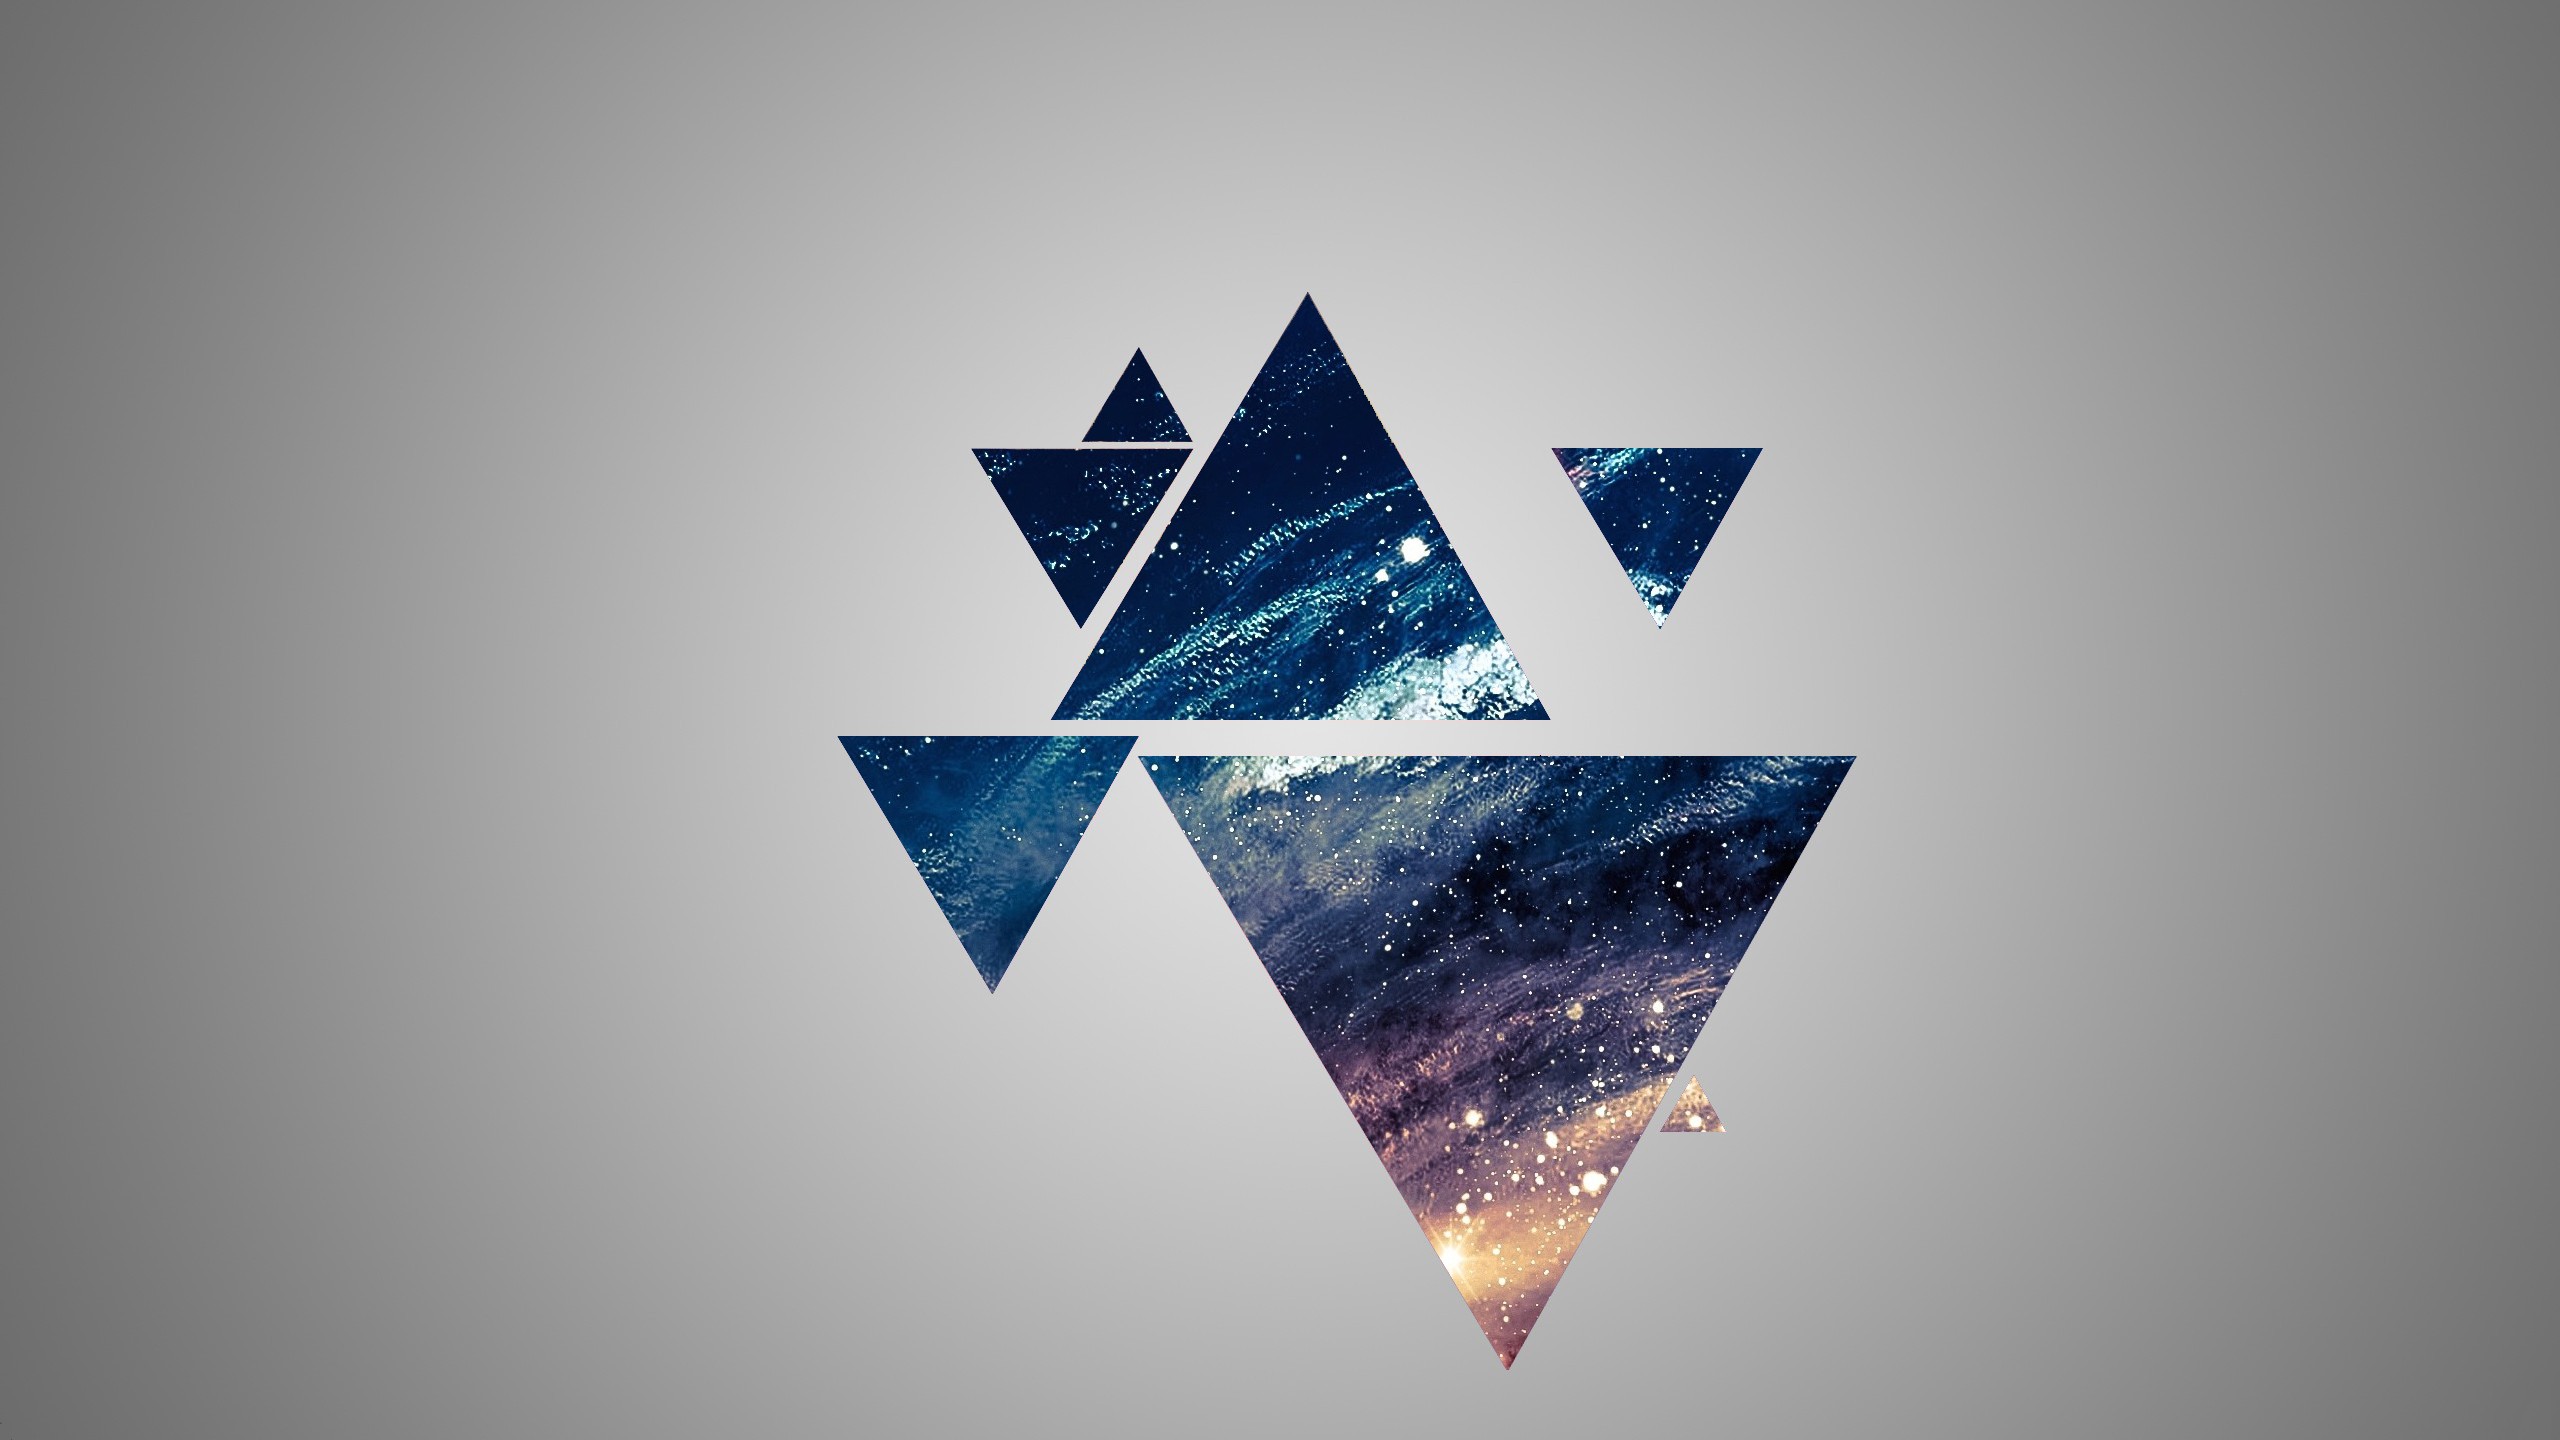 General 2560x1440 space blue yellow gray triangle geometry simple background space art digital art geometric figures